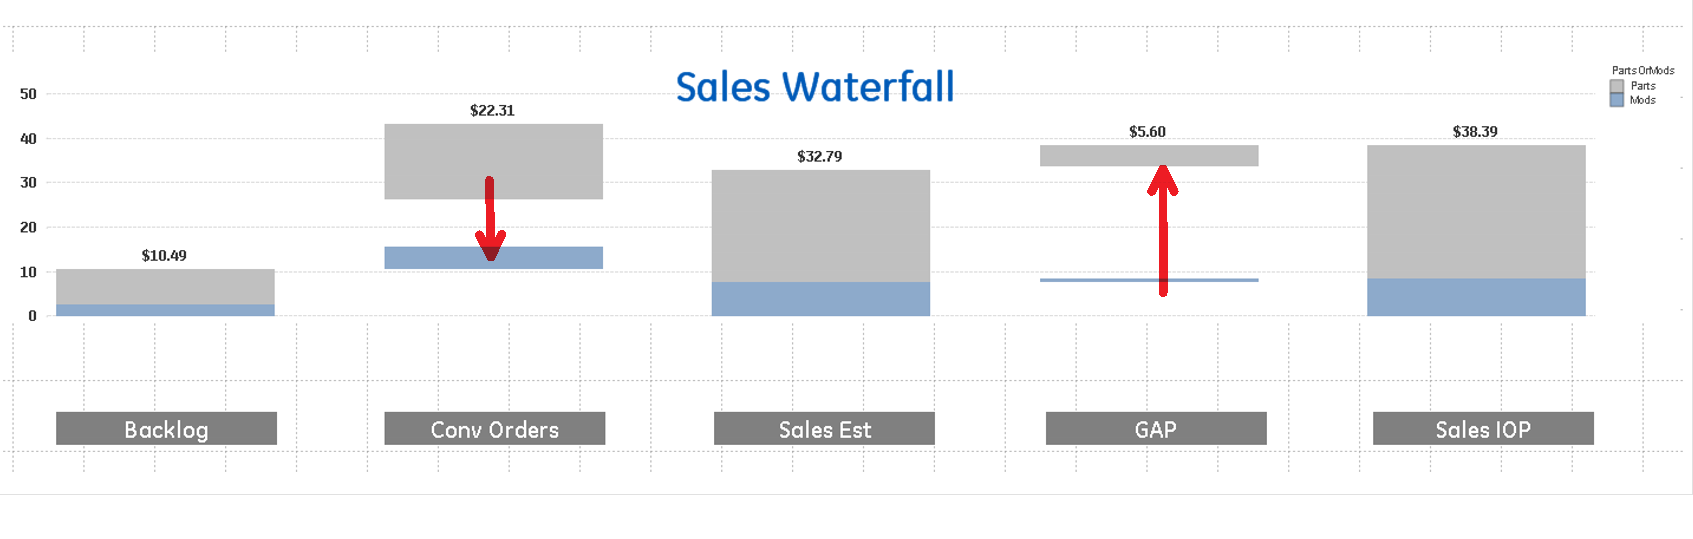 sales waterfall example.png